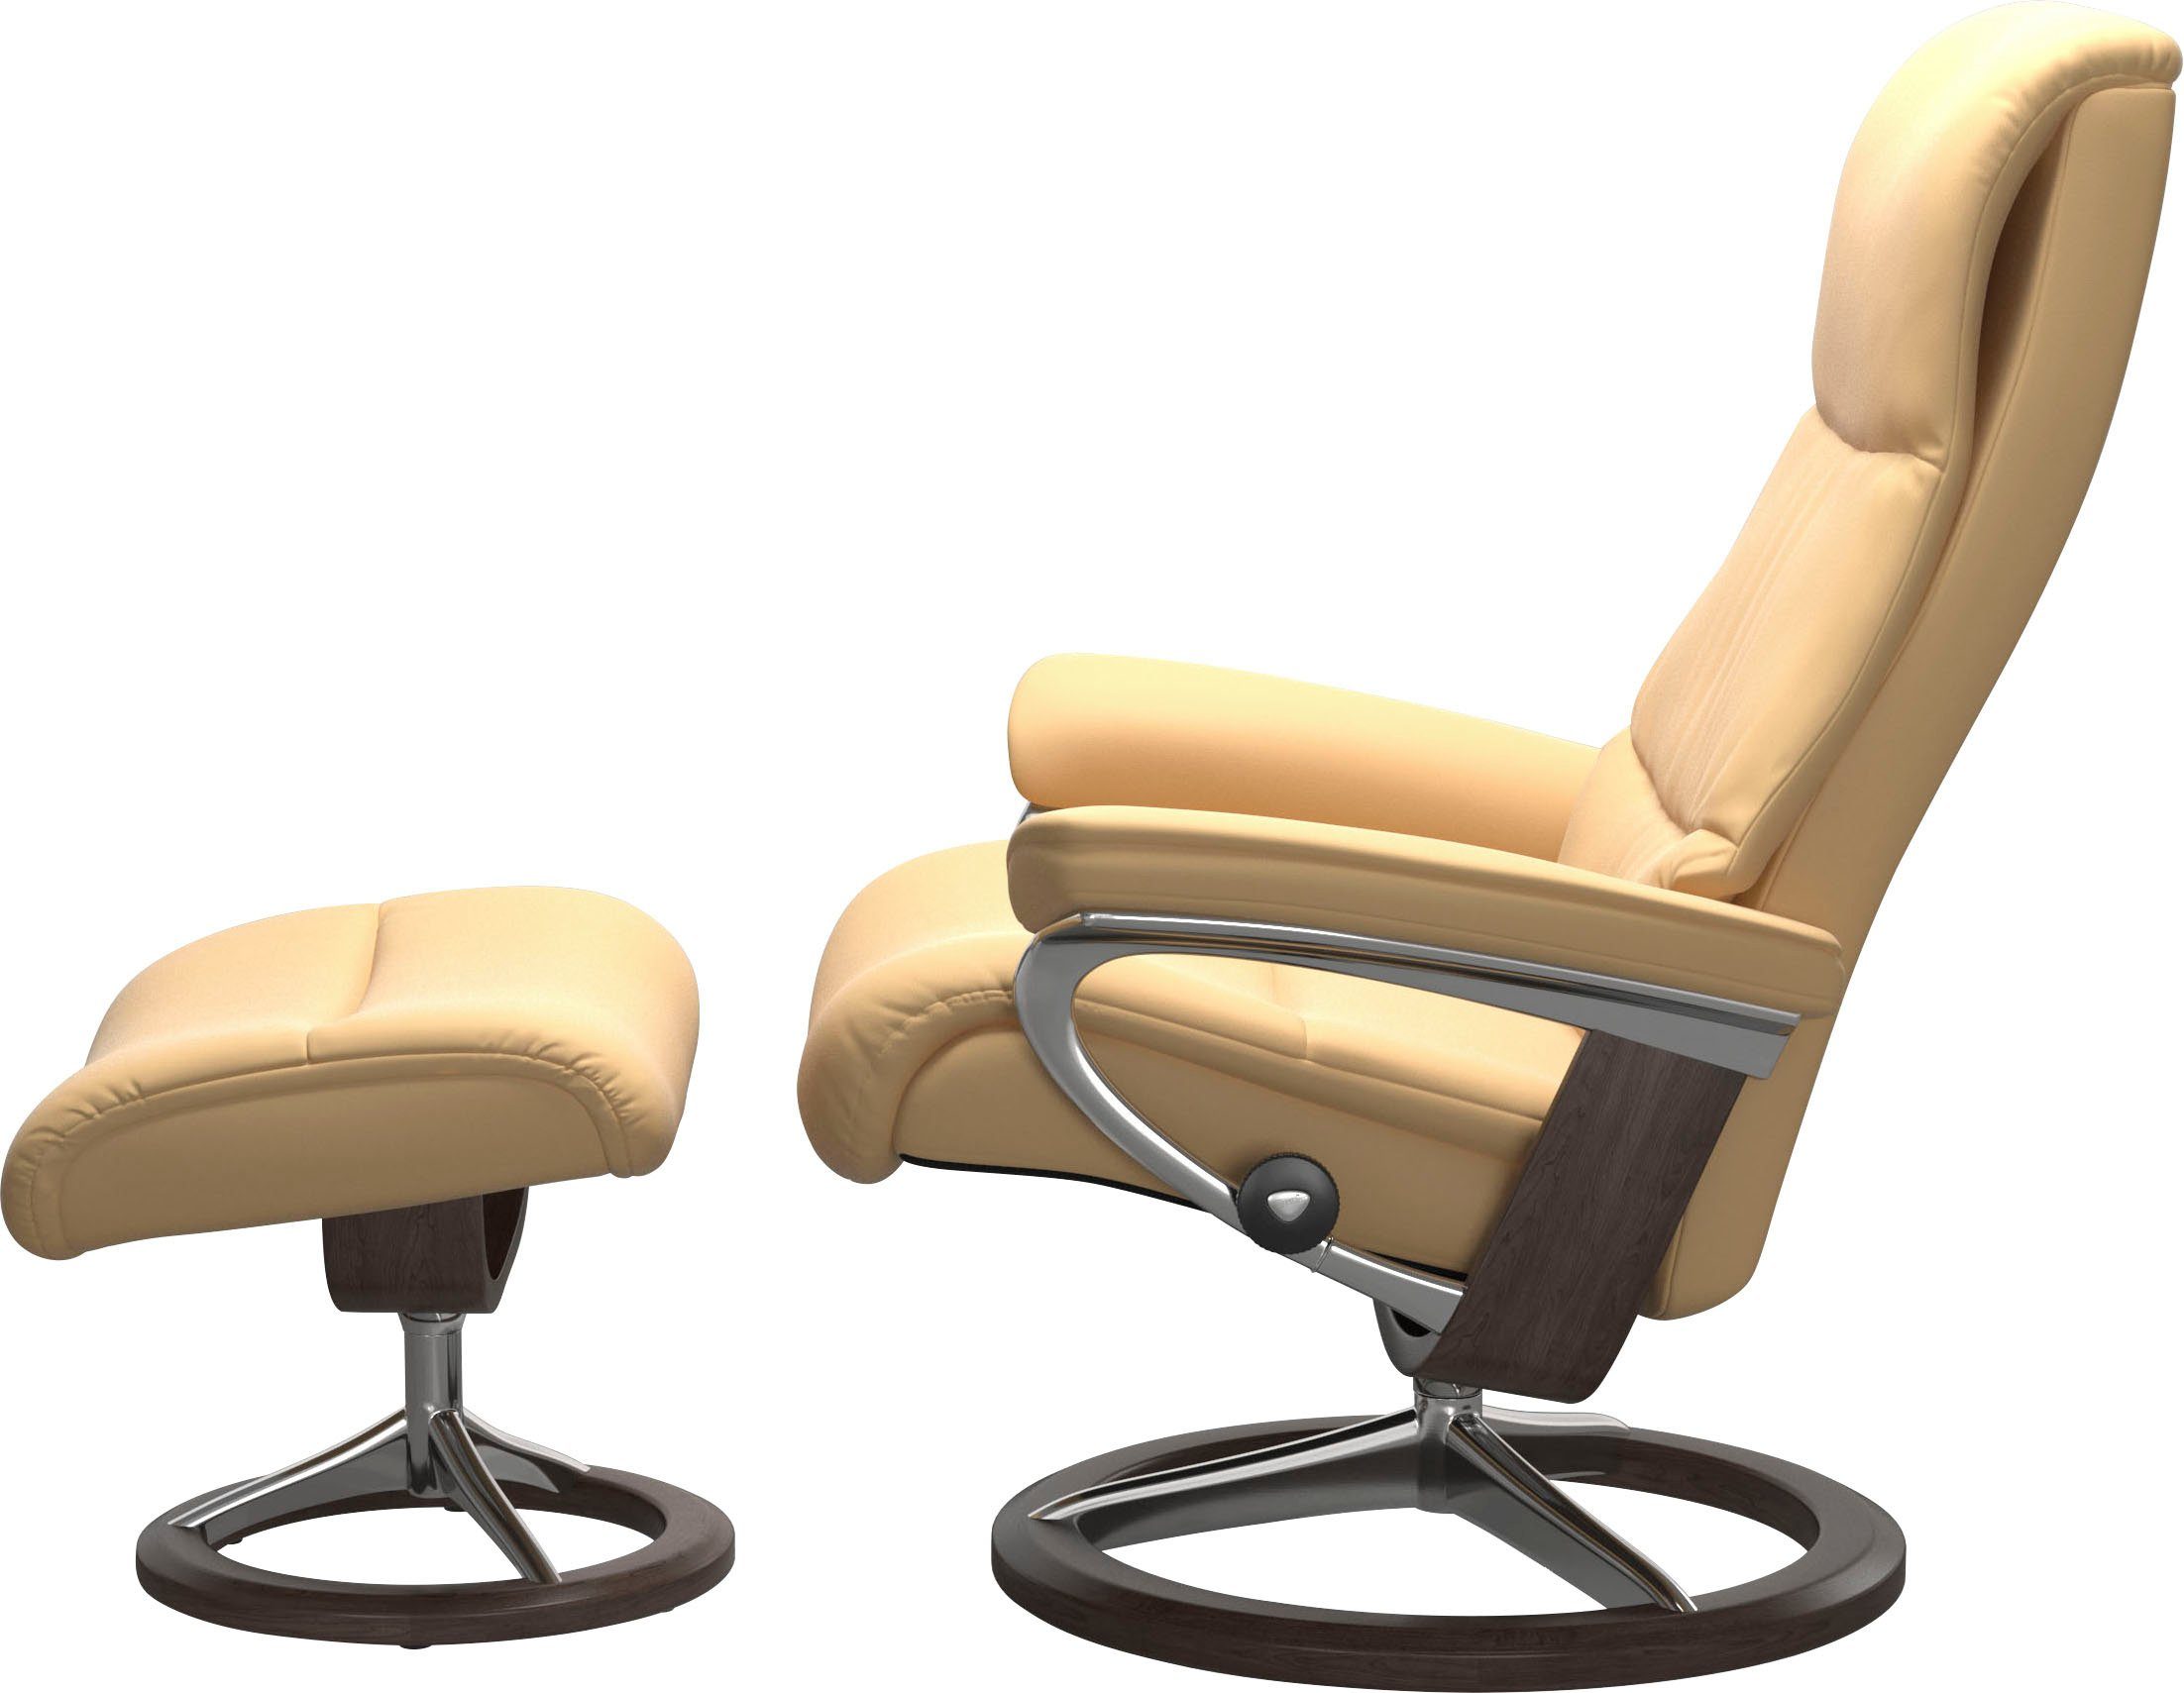 Signature View, Größe S,Gestell Base, Relaxsessel Stressless® mit Wenge